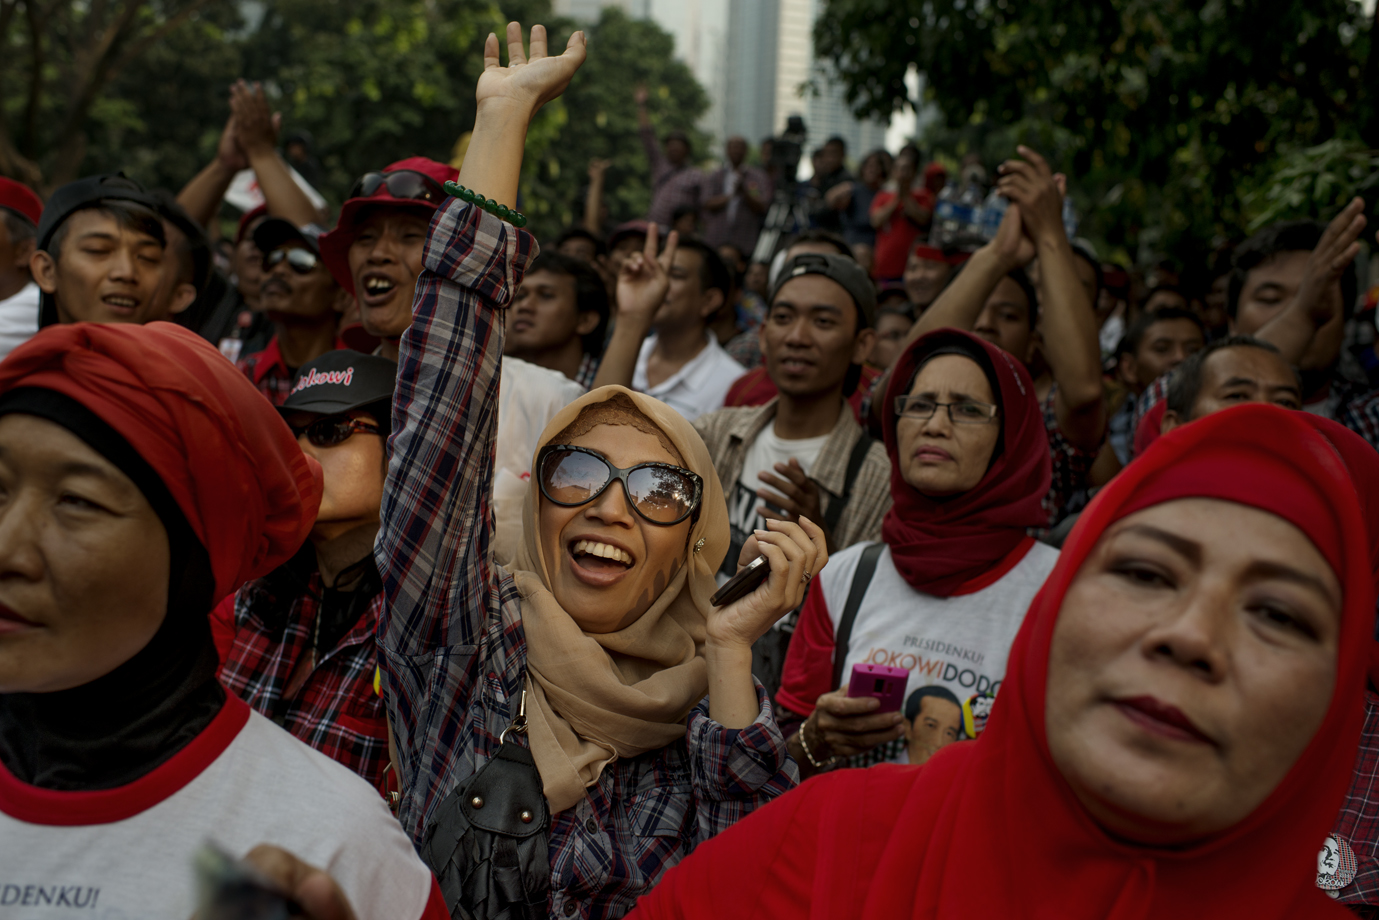  Supporters for the presidential campaign for Joko Widodo, Jakarta / Indonesia - 2014 